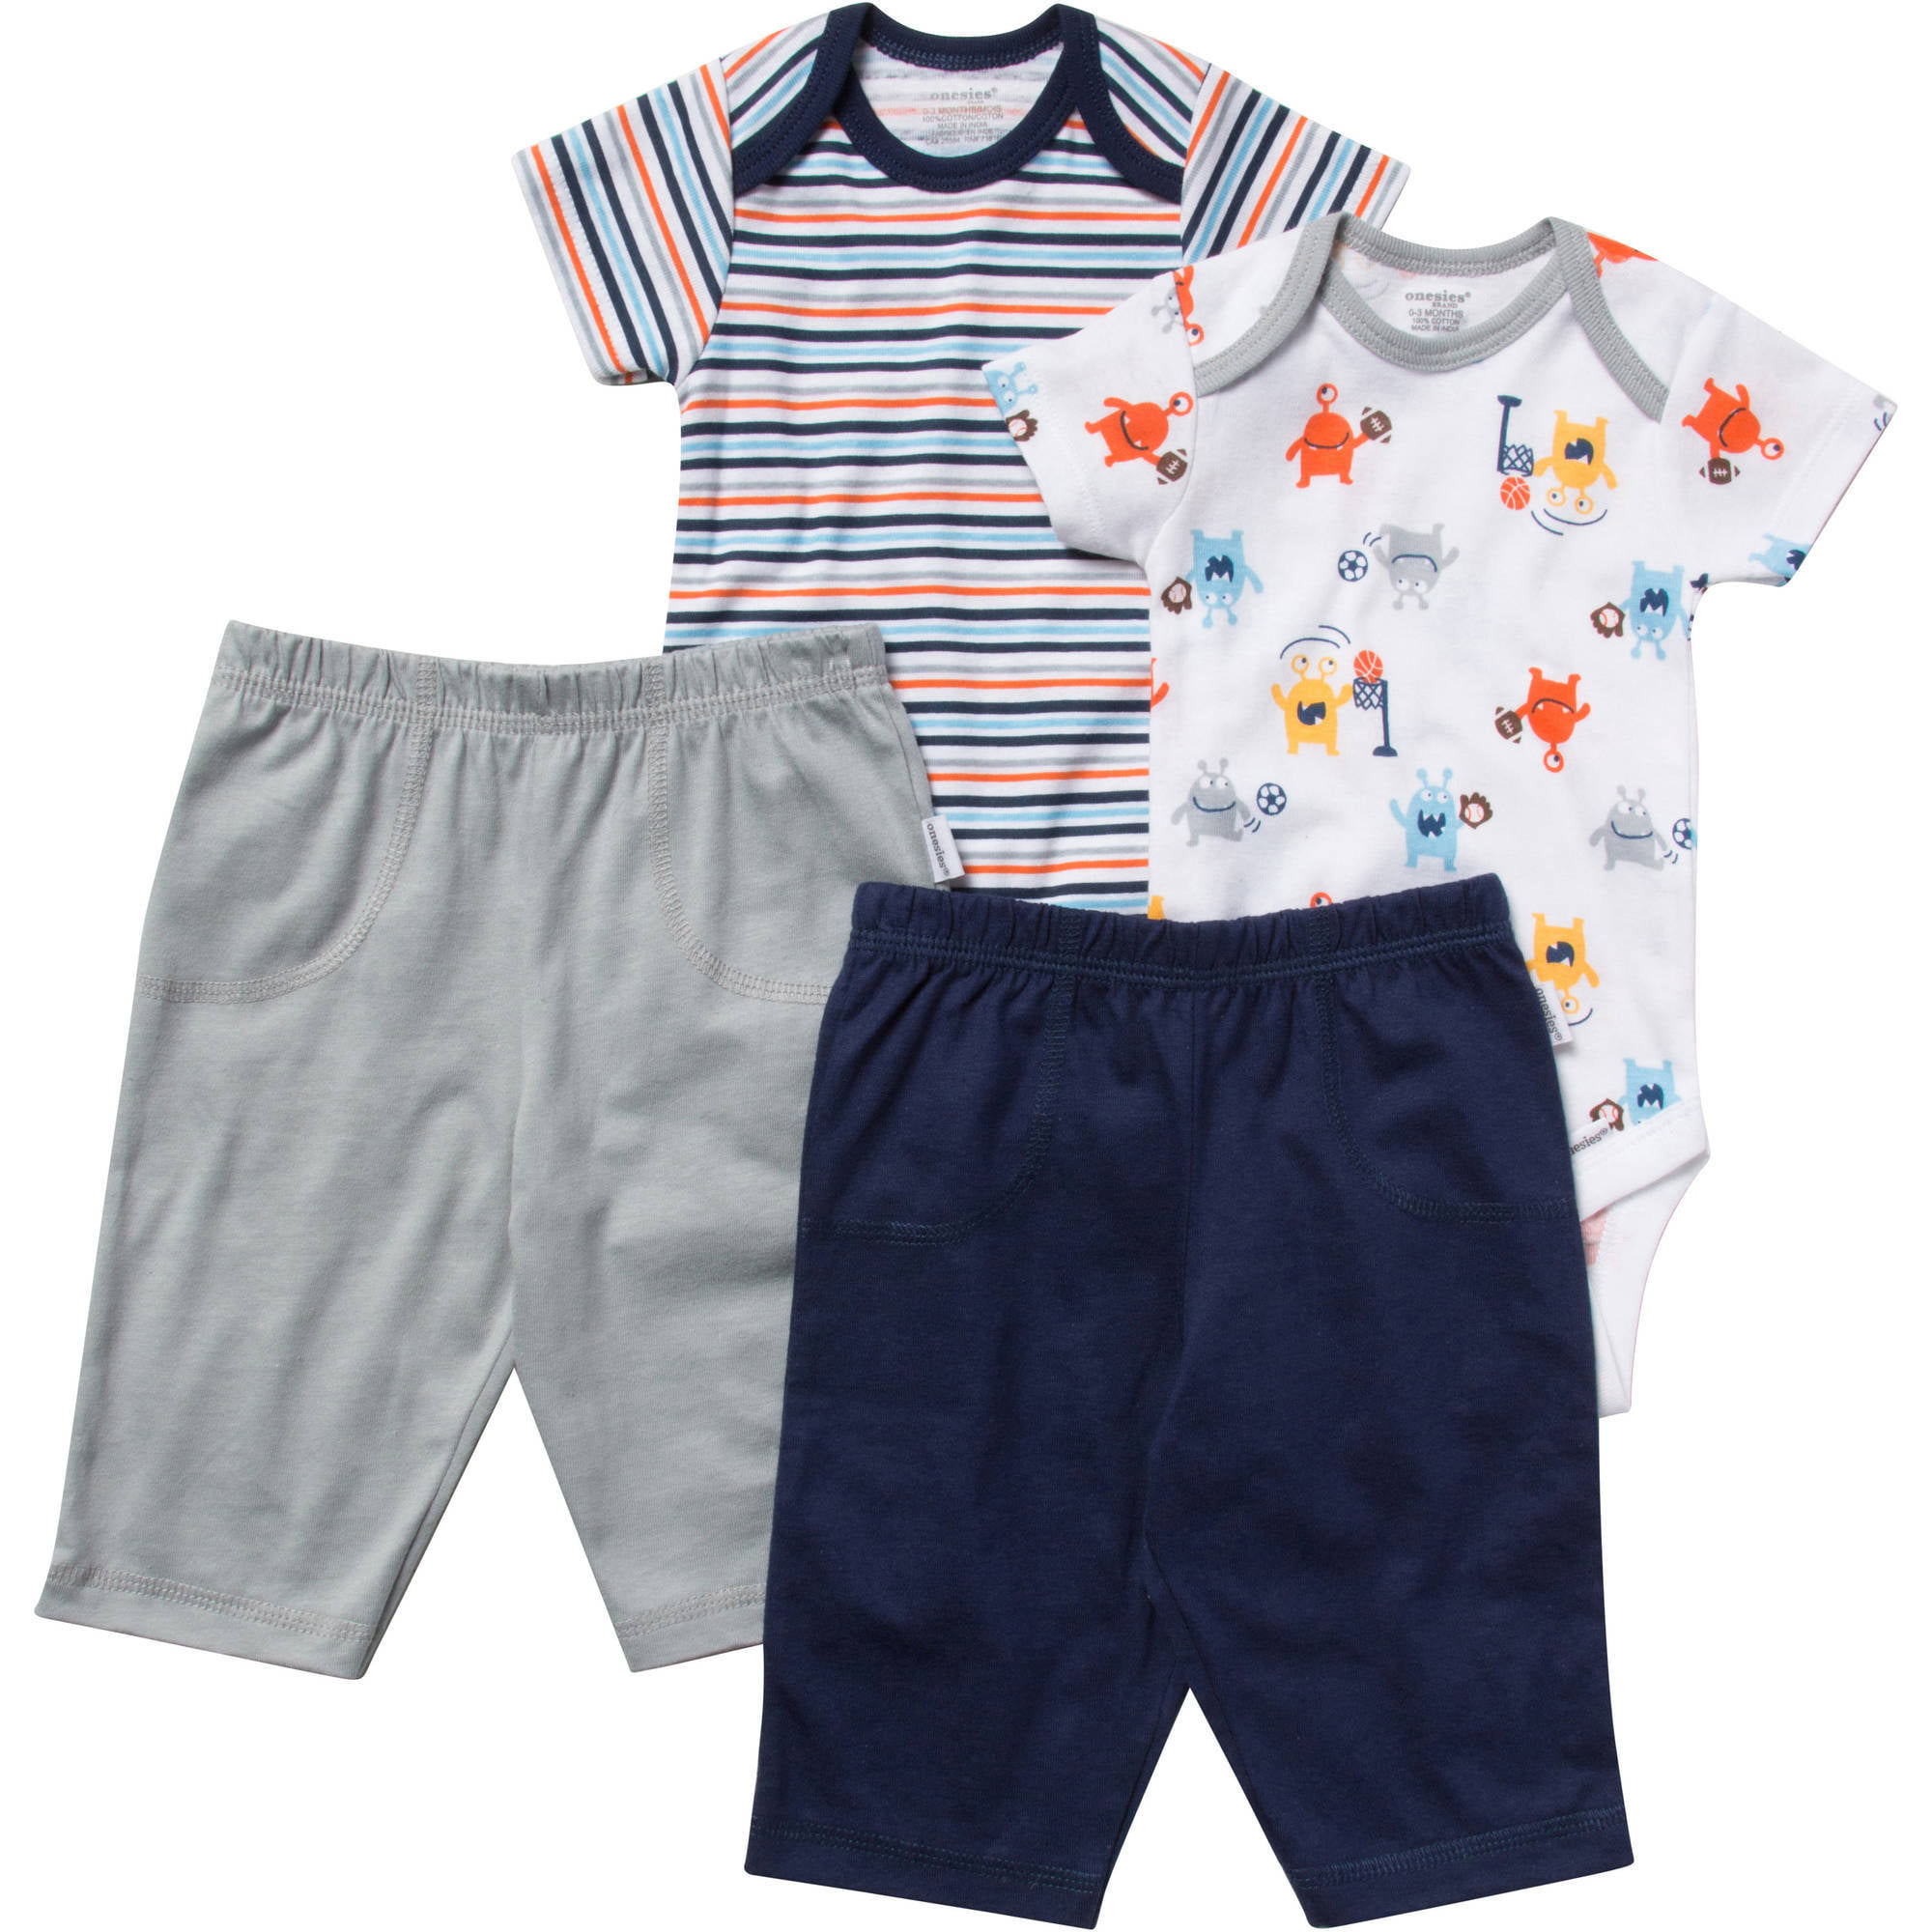 Details about   Walmart Infant Boys Sleepers 3 Styles and Sizes to Choose From NWT 